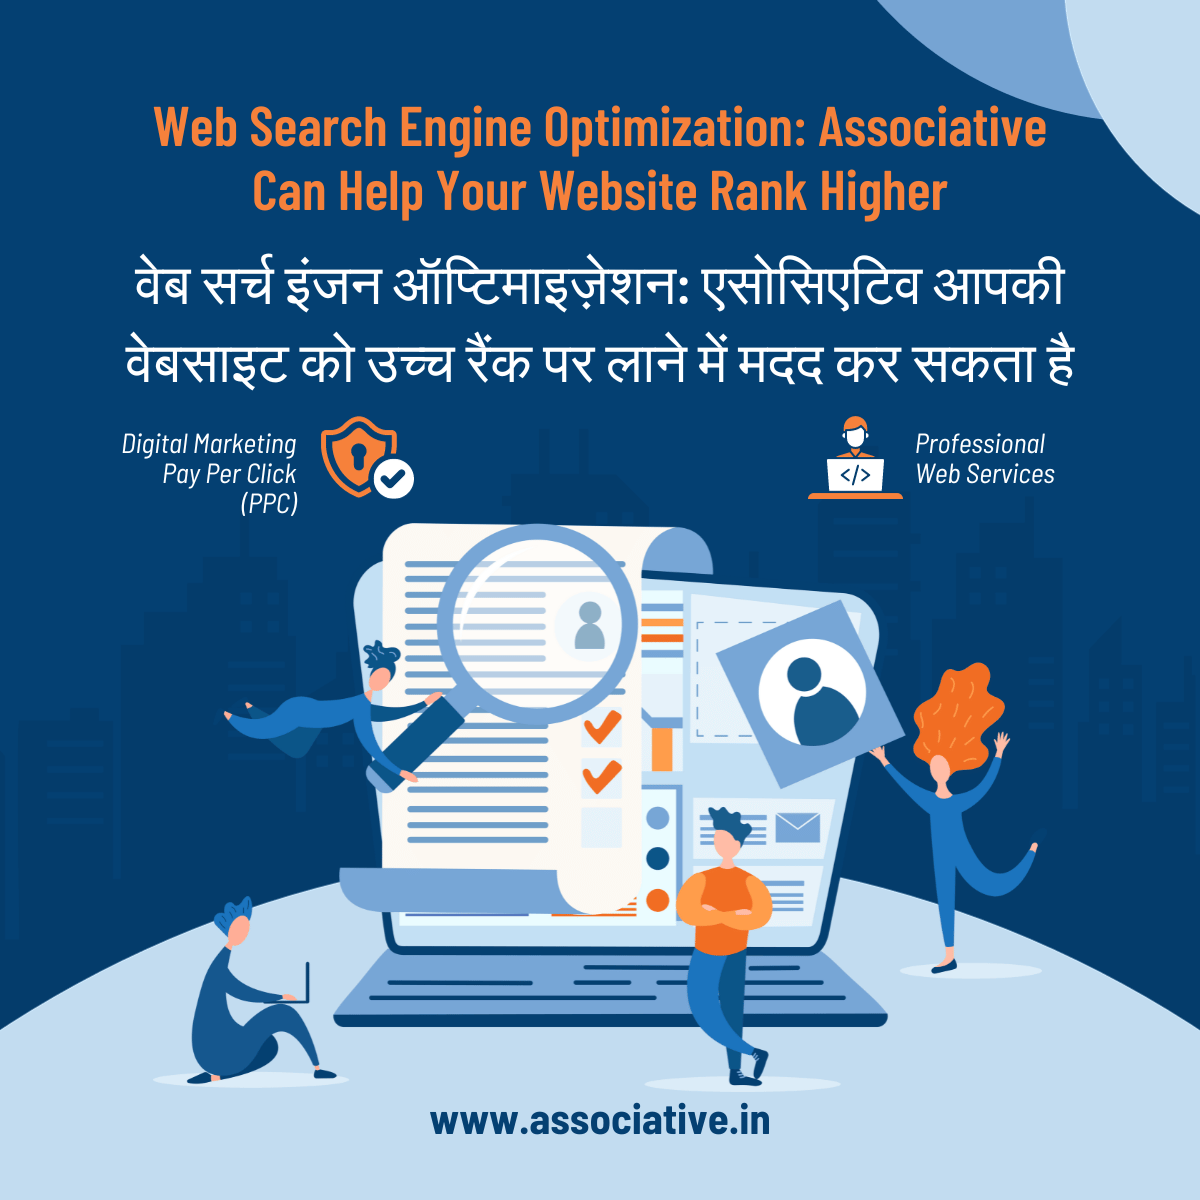 Web Search Engine Optimization: Associative Can Help Your Website Rank Higher